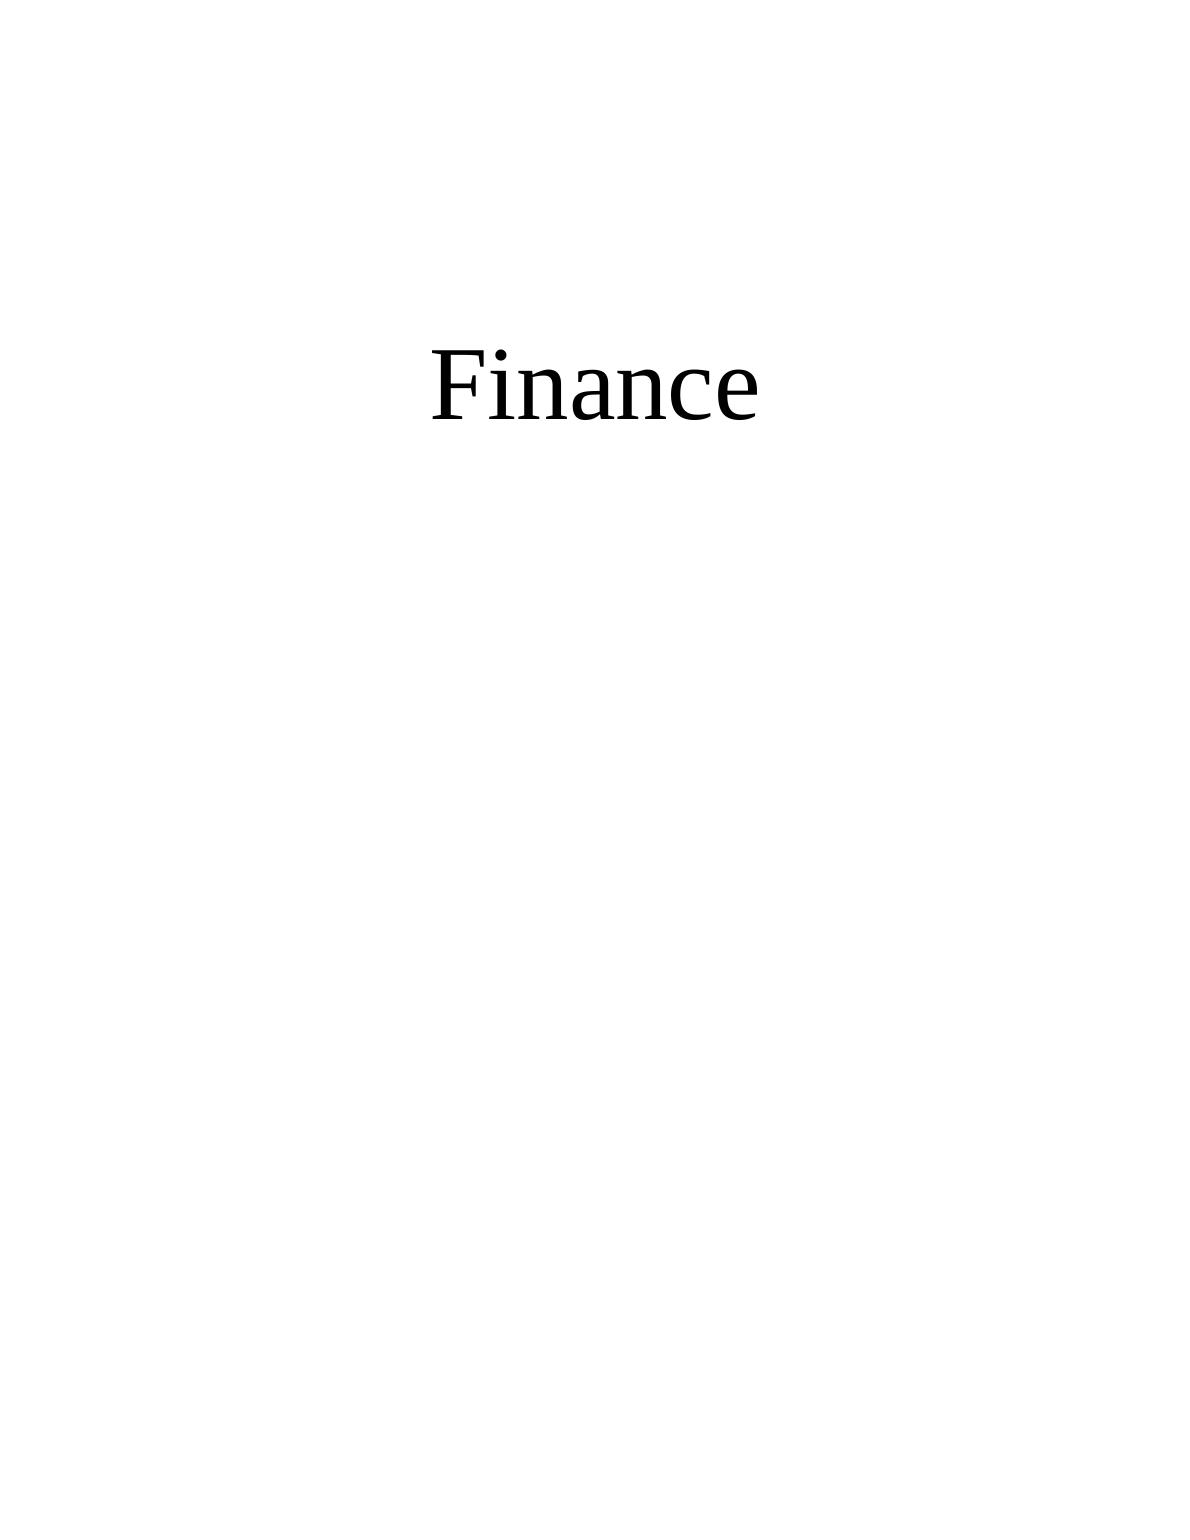 Financial Analysis, Valuation, and Capital Structure of BAE Systems Plc_1